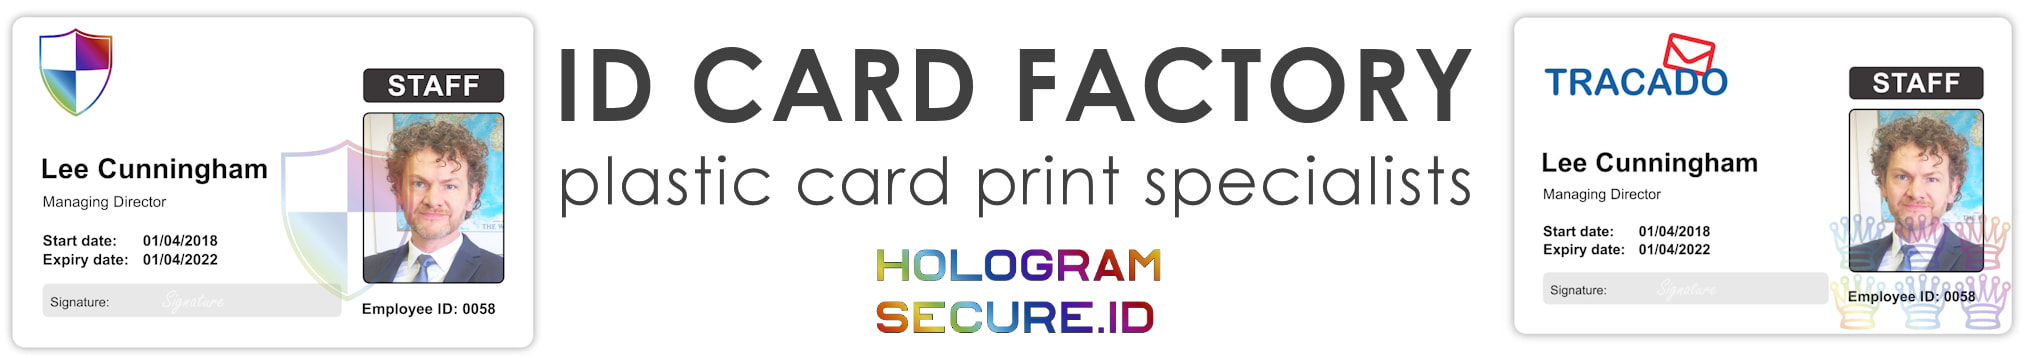 Liverpool holographic ID cards | examples of staff photo ID cards | samples of employee Identity card printing | Workers ID cards printed with hologram